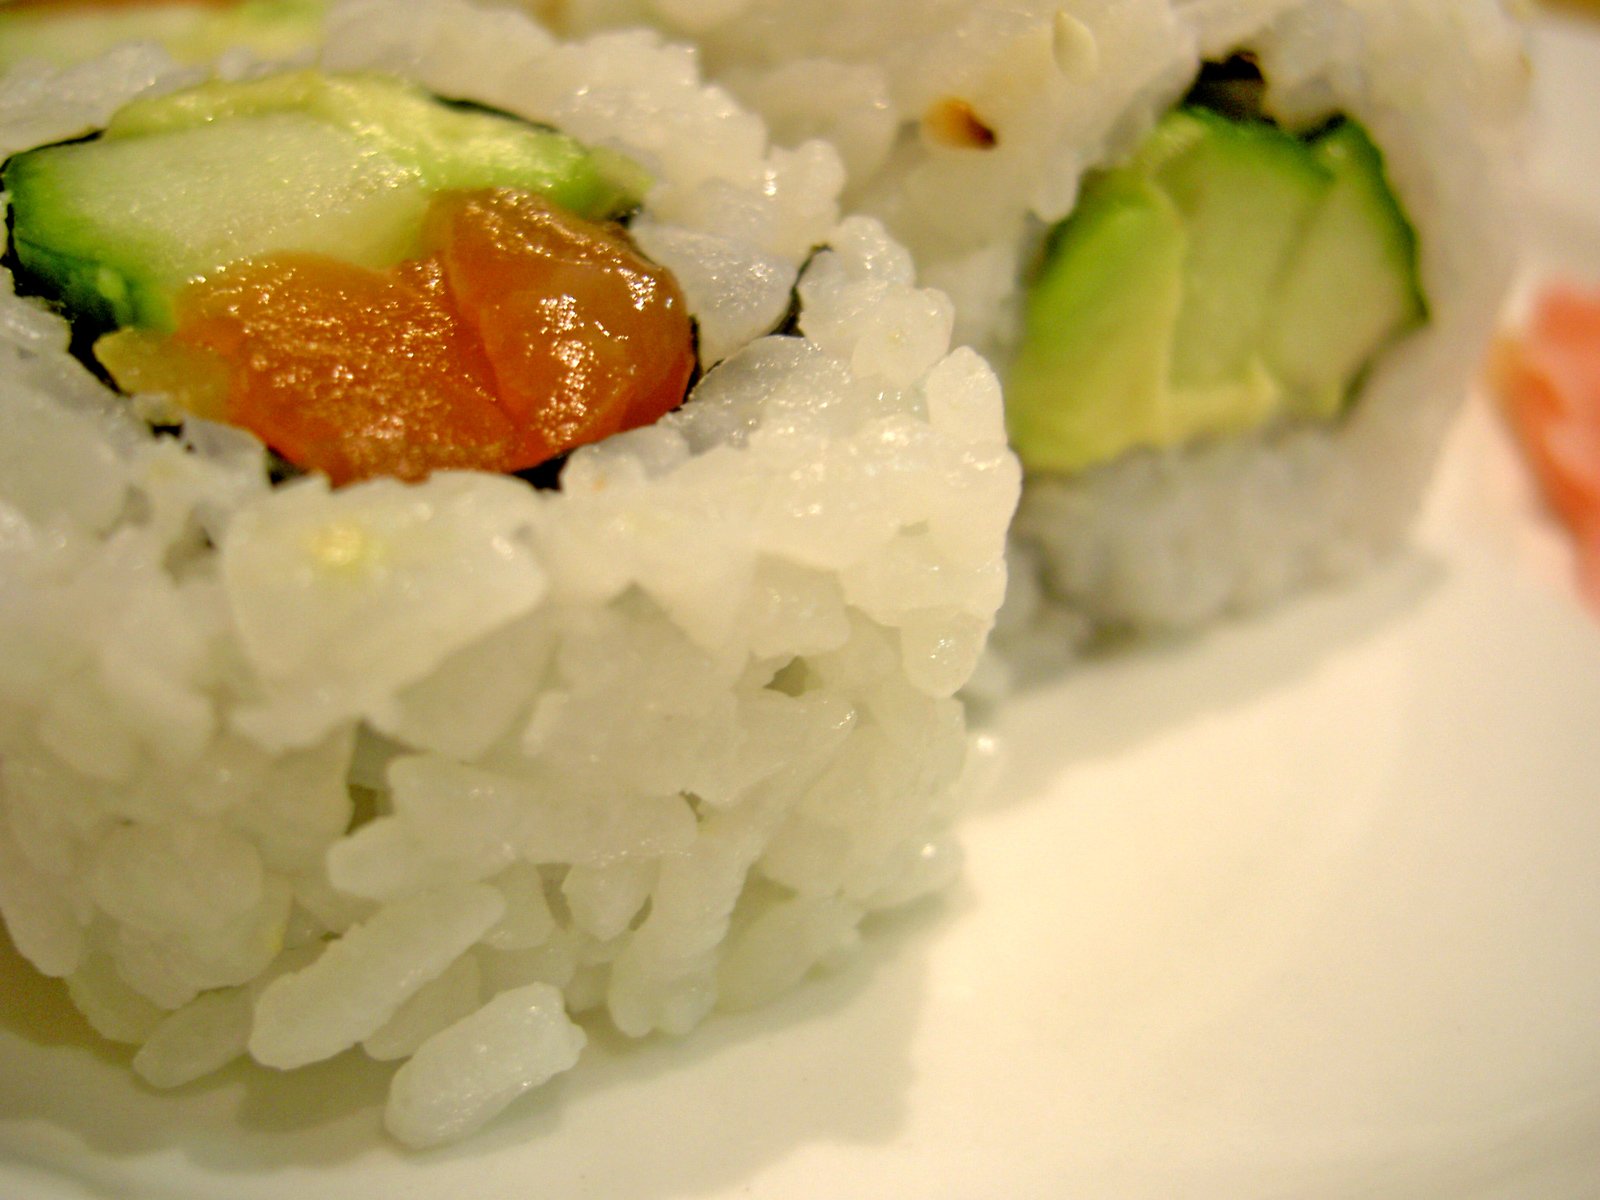 pieces of sushi are covered with orange sauce and cucumber